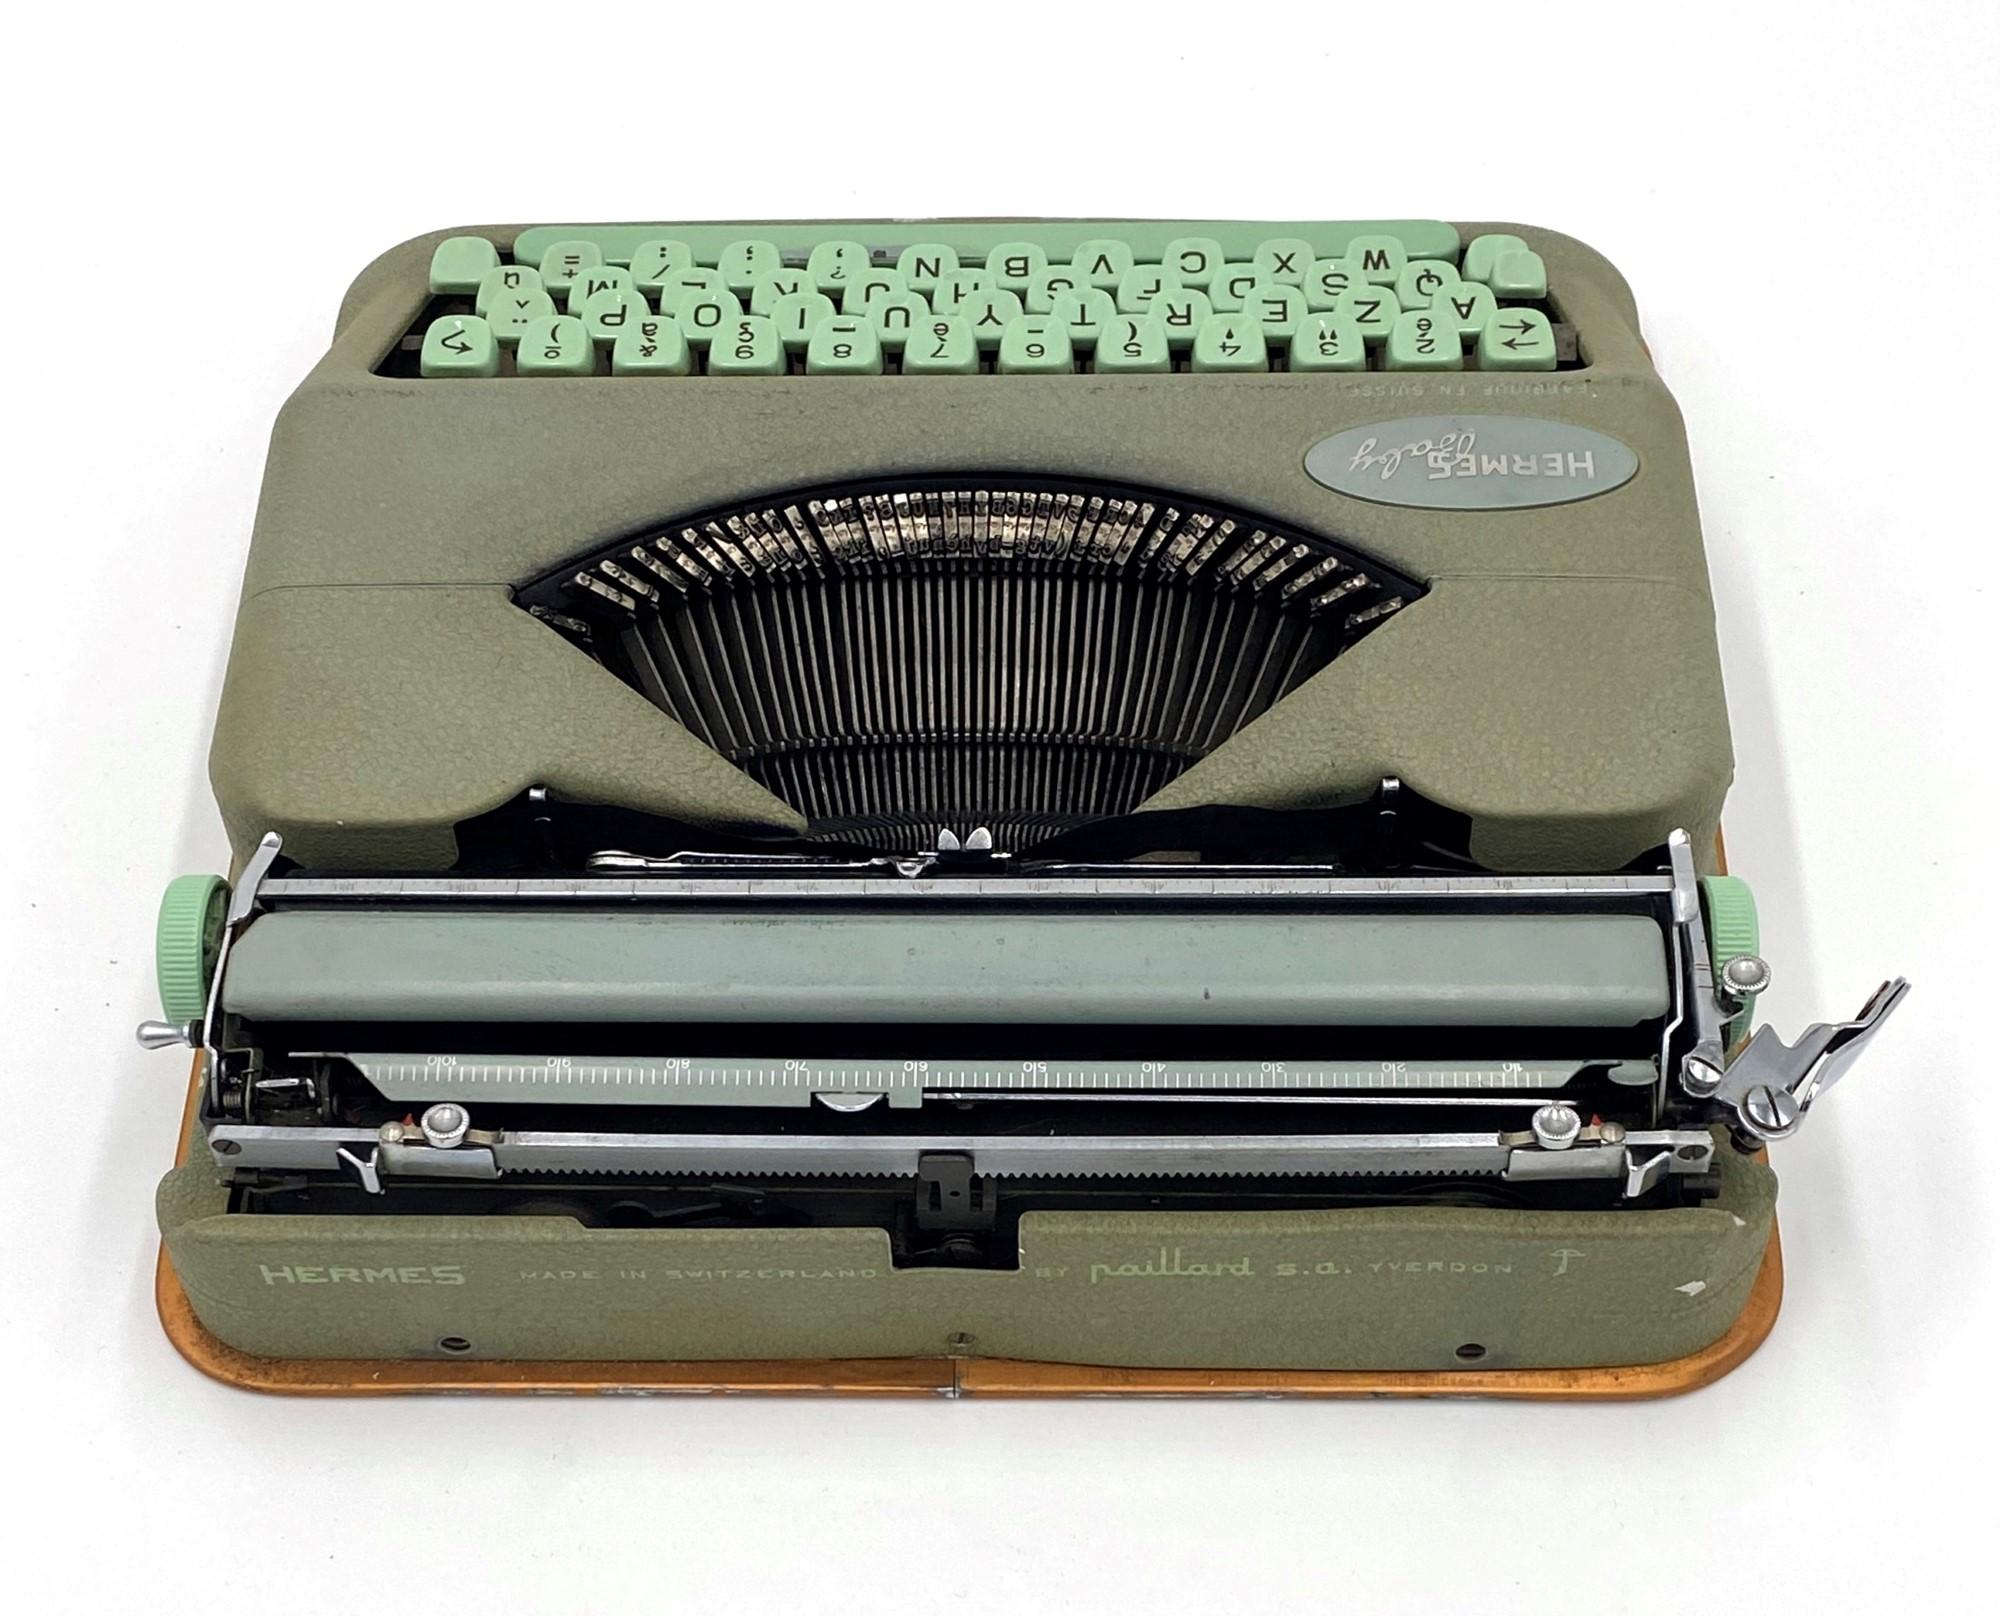 French 1960s Hermes Baby Typewriter Mint Green Color with Paperwork and Key